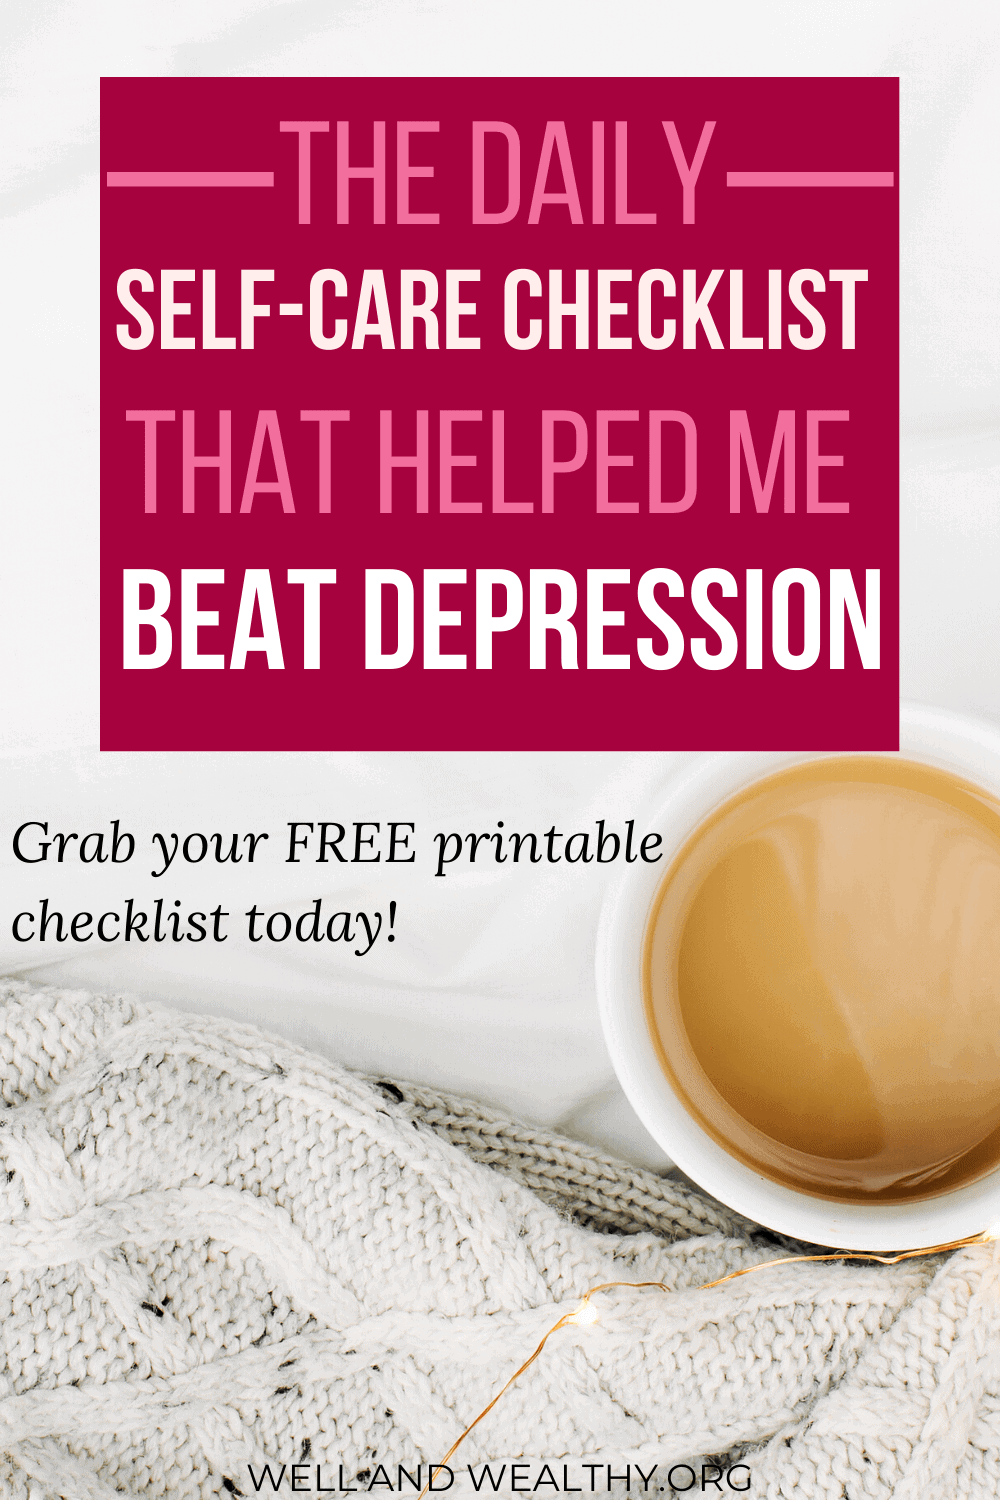 This is the simple daily self-care routine that helped me in my depression recovery and to boost my happiness. The tips are super simple and quick to do and have really had a positive impact on my life. Mental health is so important but this self care depression checklist can really help you beat depression and fight depression. Because self-care activities and ideas really can transform your mental health. Starting a daily self-care routine had a massive impact on improving my mood and helping to cure my depression. Check out the easy self-care routine I do each day that you can do to help your mental health! Plus, grab the free, printable daily self-care checklist! #selfcare #selfcareroutine #freeprintable